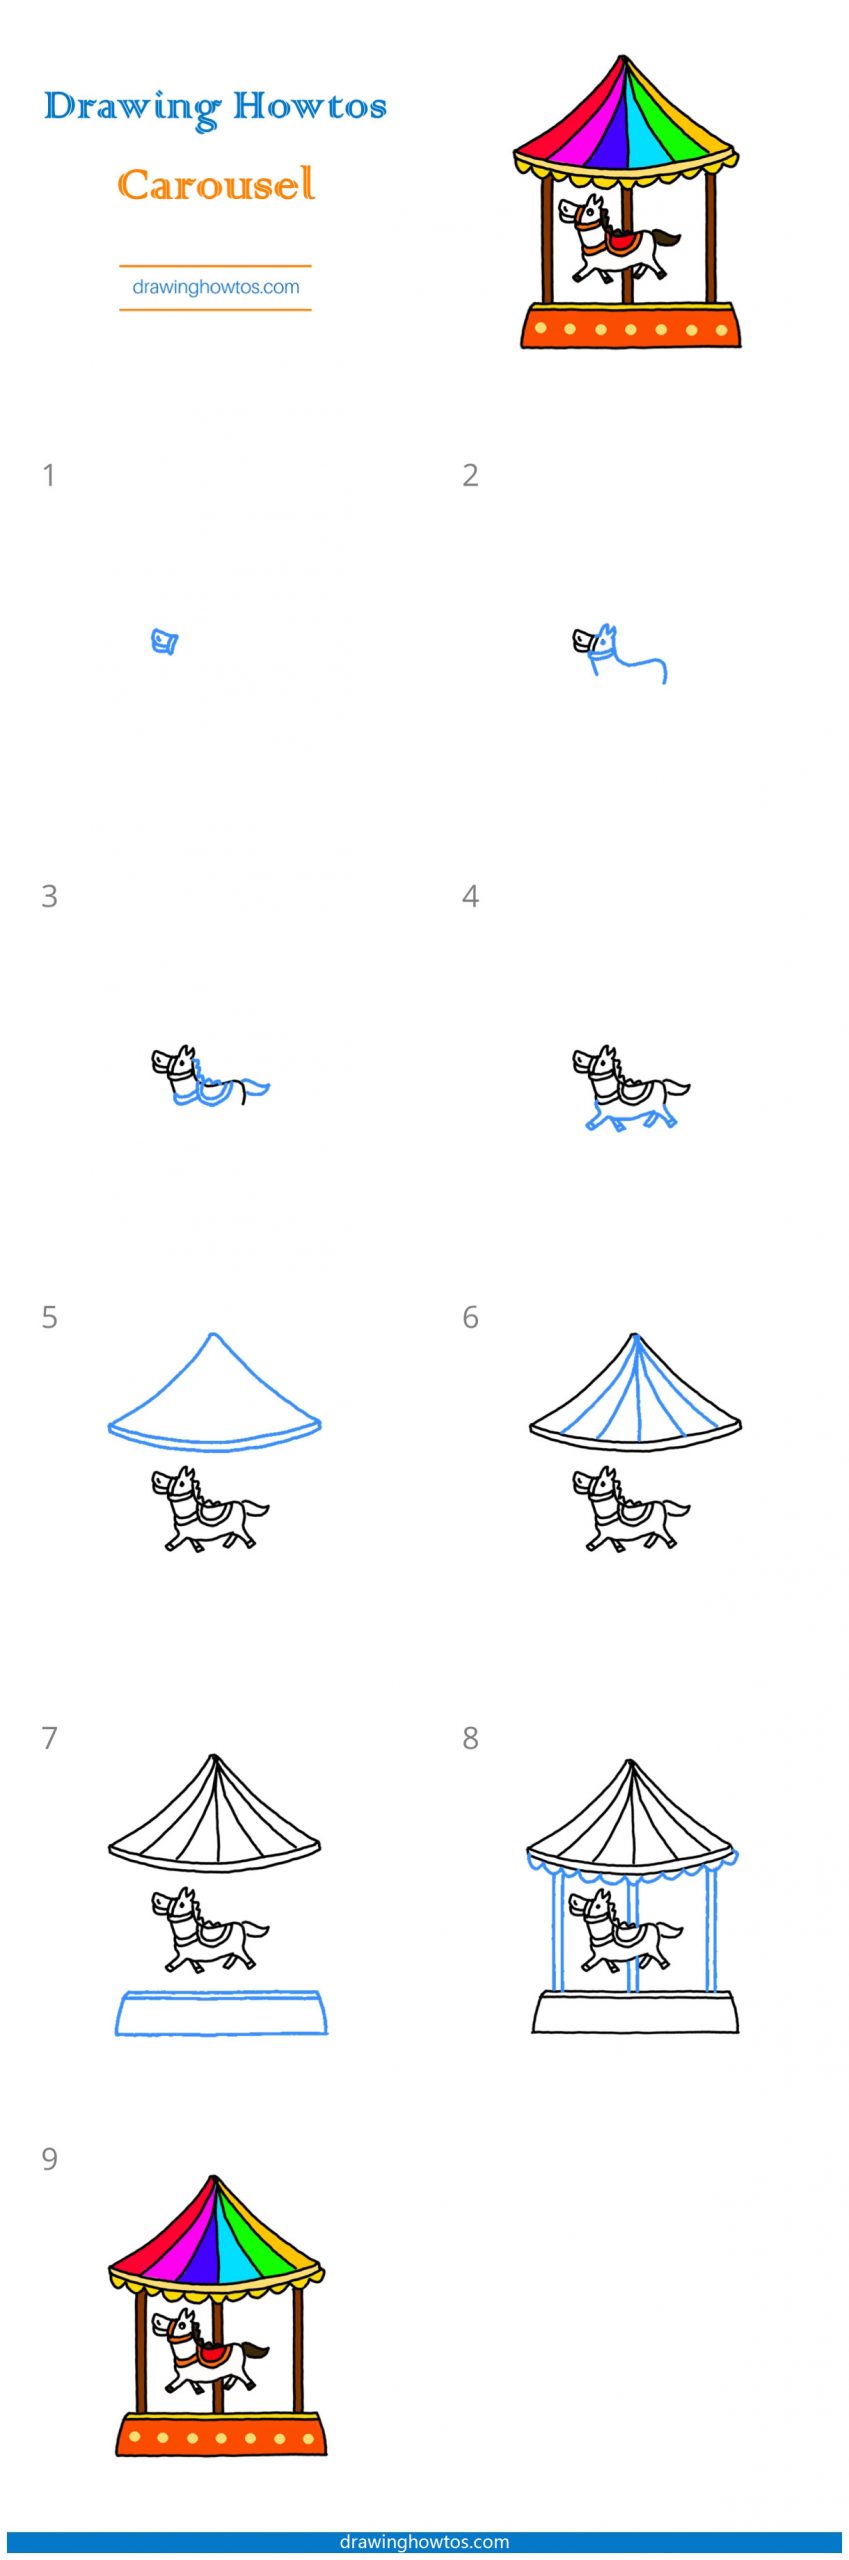 How to Draw a Carousel Horse Step by Step